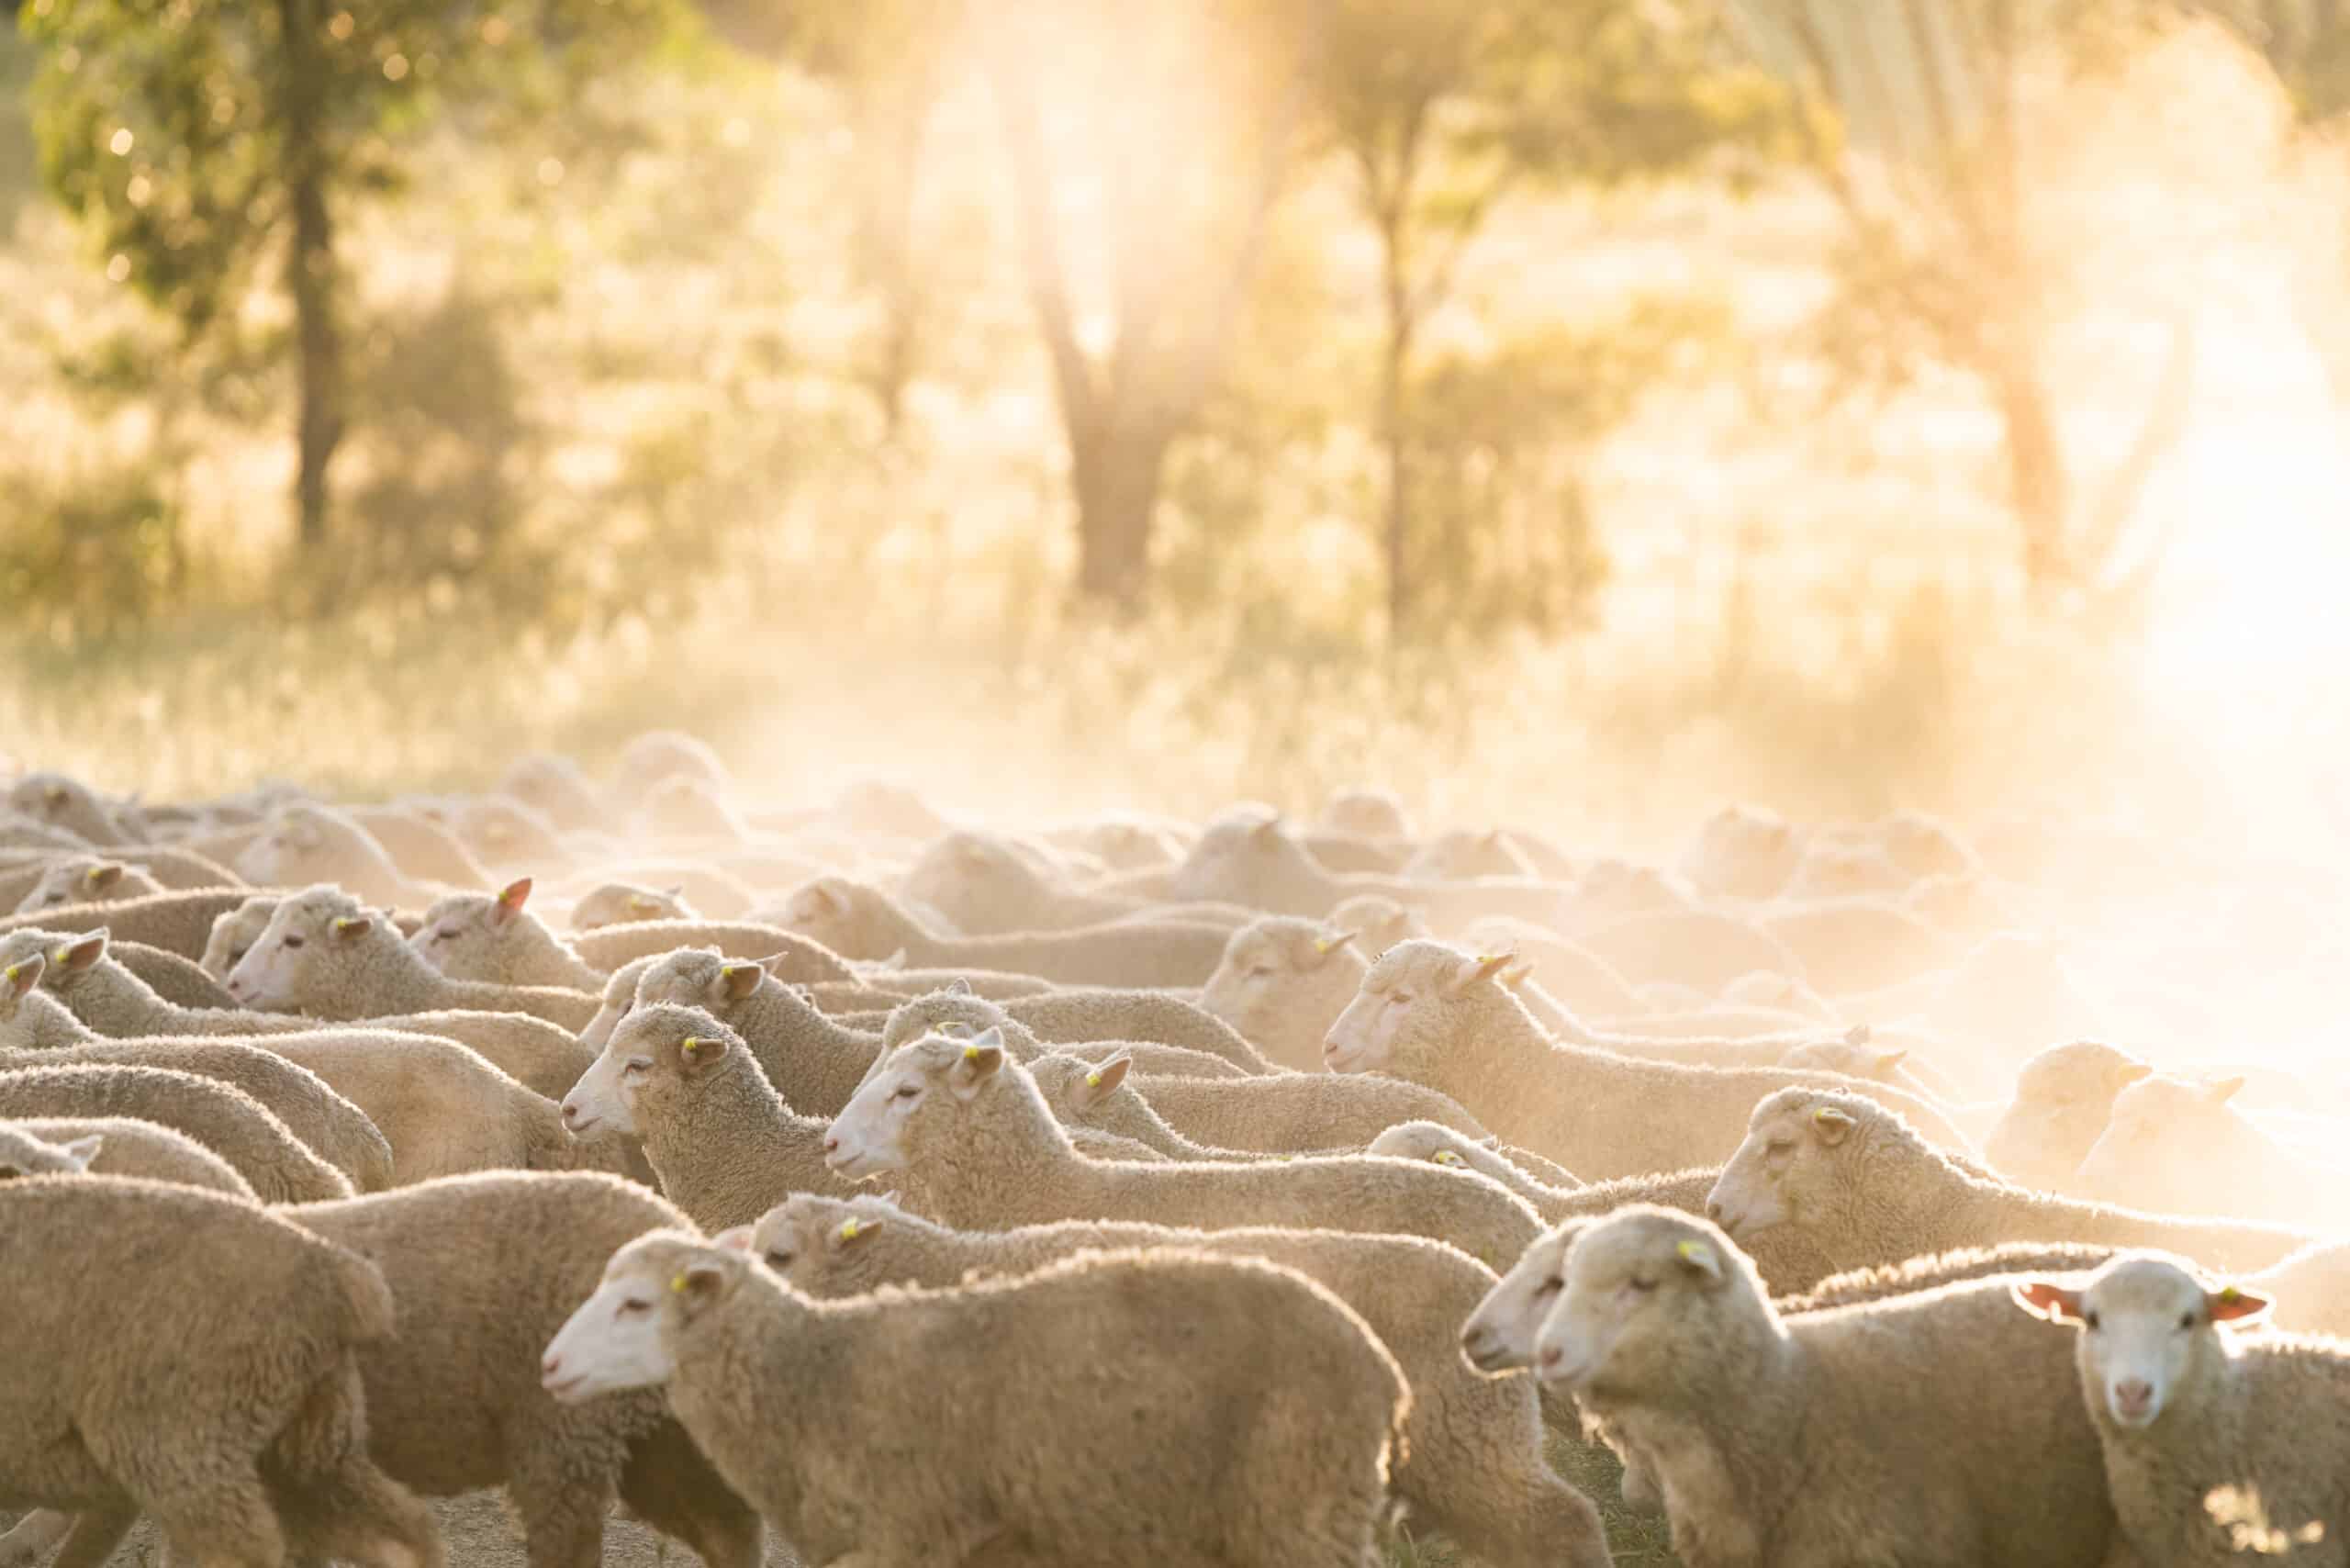 Herd & Grace Announces the Launch of Gundagai Lamb as Part of Curated Cuts Collection